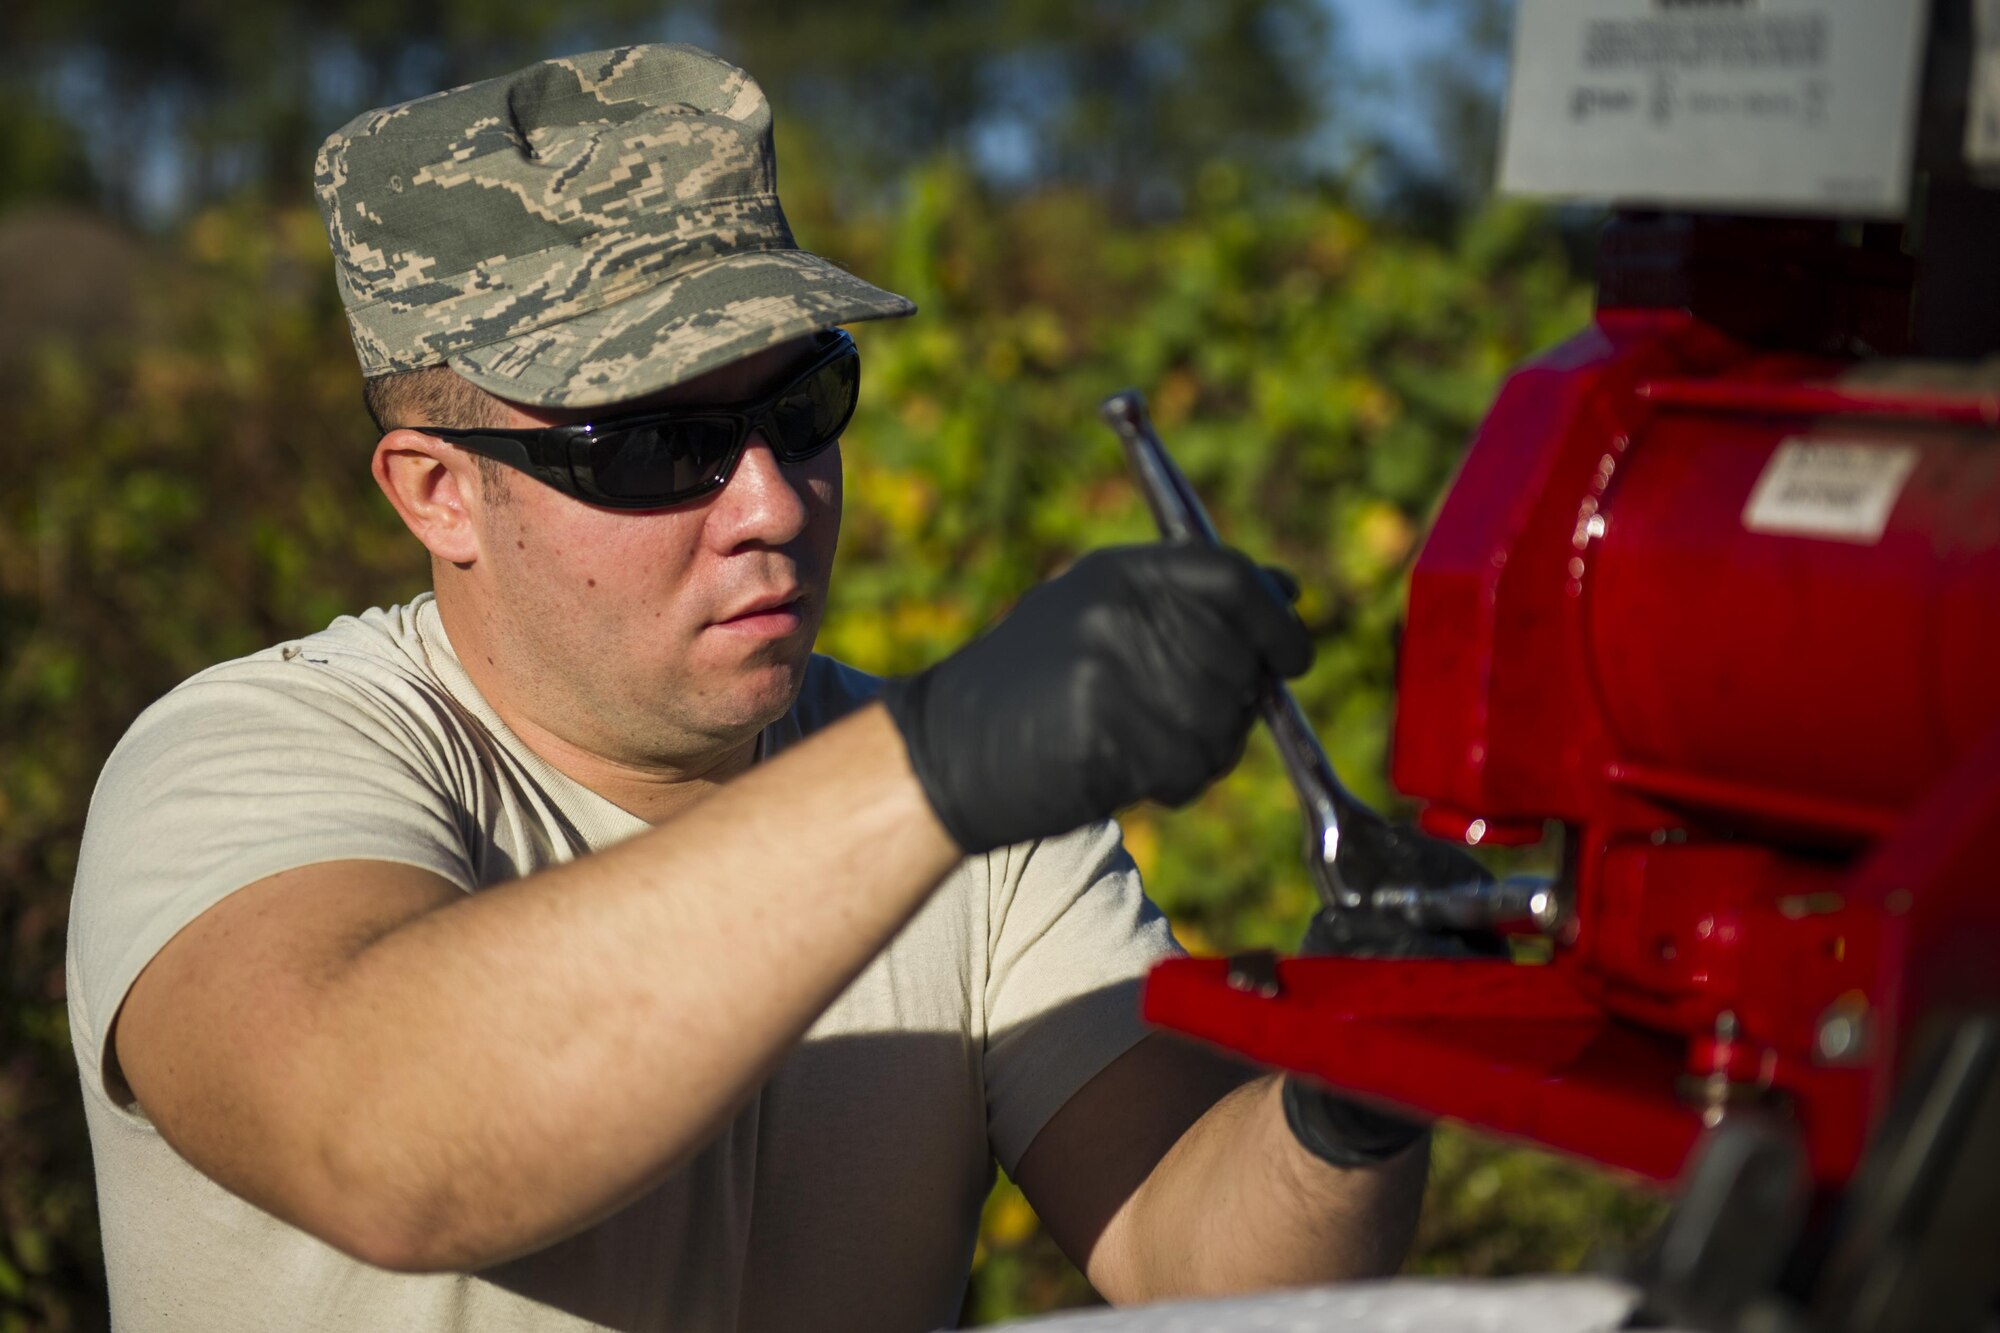 Senior Airman Dacota Napolitano, a water and fuels system specialist with the 1st Special Operations Civil Engineer Squadron, uses a socket wrench to install a fuel pump at Hurlburt Field, Fla., Nov. 17, 2016. The 1st SOCES replaced a fuel pump with a new one. (U.S. Air Force photo by Airman 1st Class Joseph Pick)